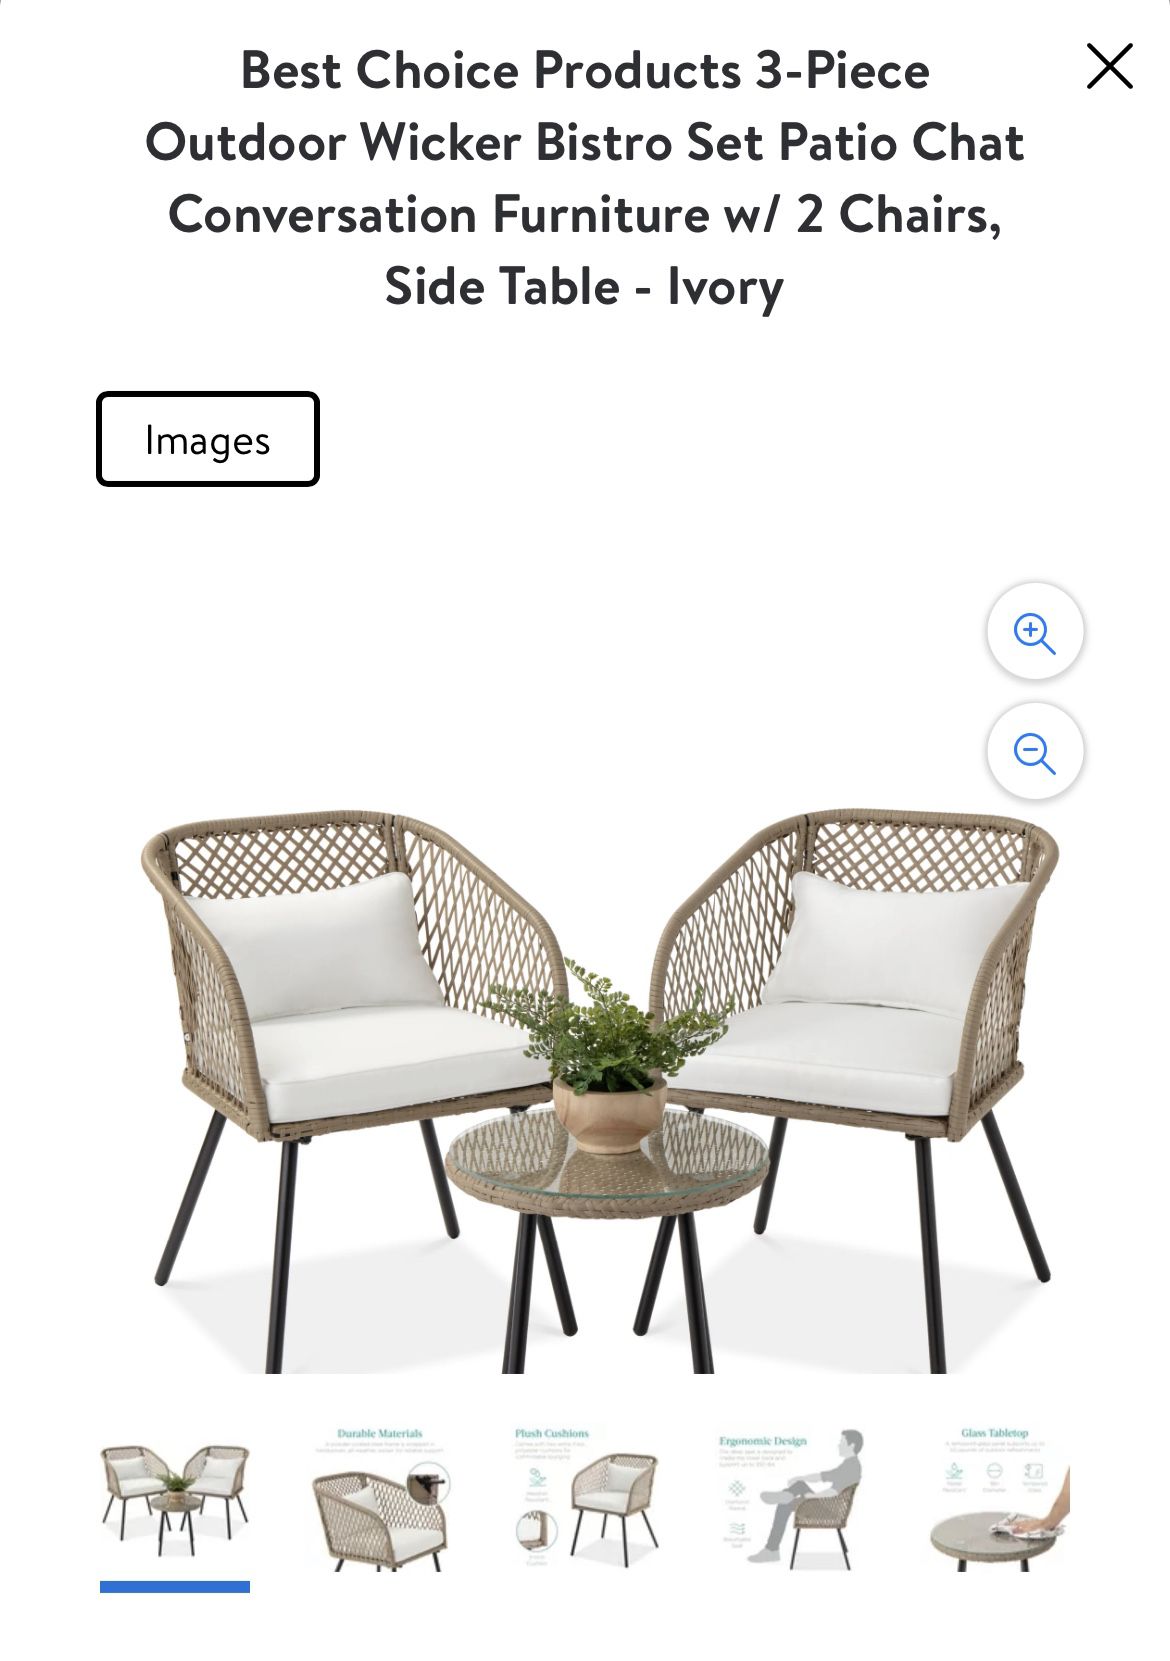 Best Choice Products 3-Piece Outdoor Wicker Bistro Set Patio Chat Conversation Furniture w/ 2 Chairs, Side Table - Ivory